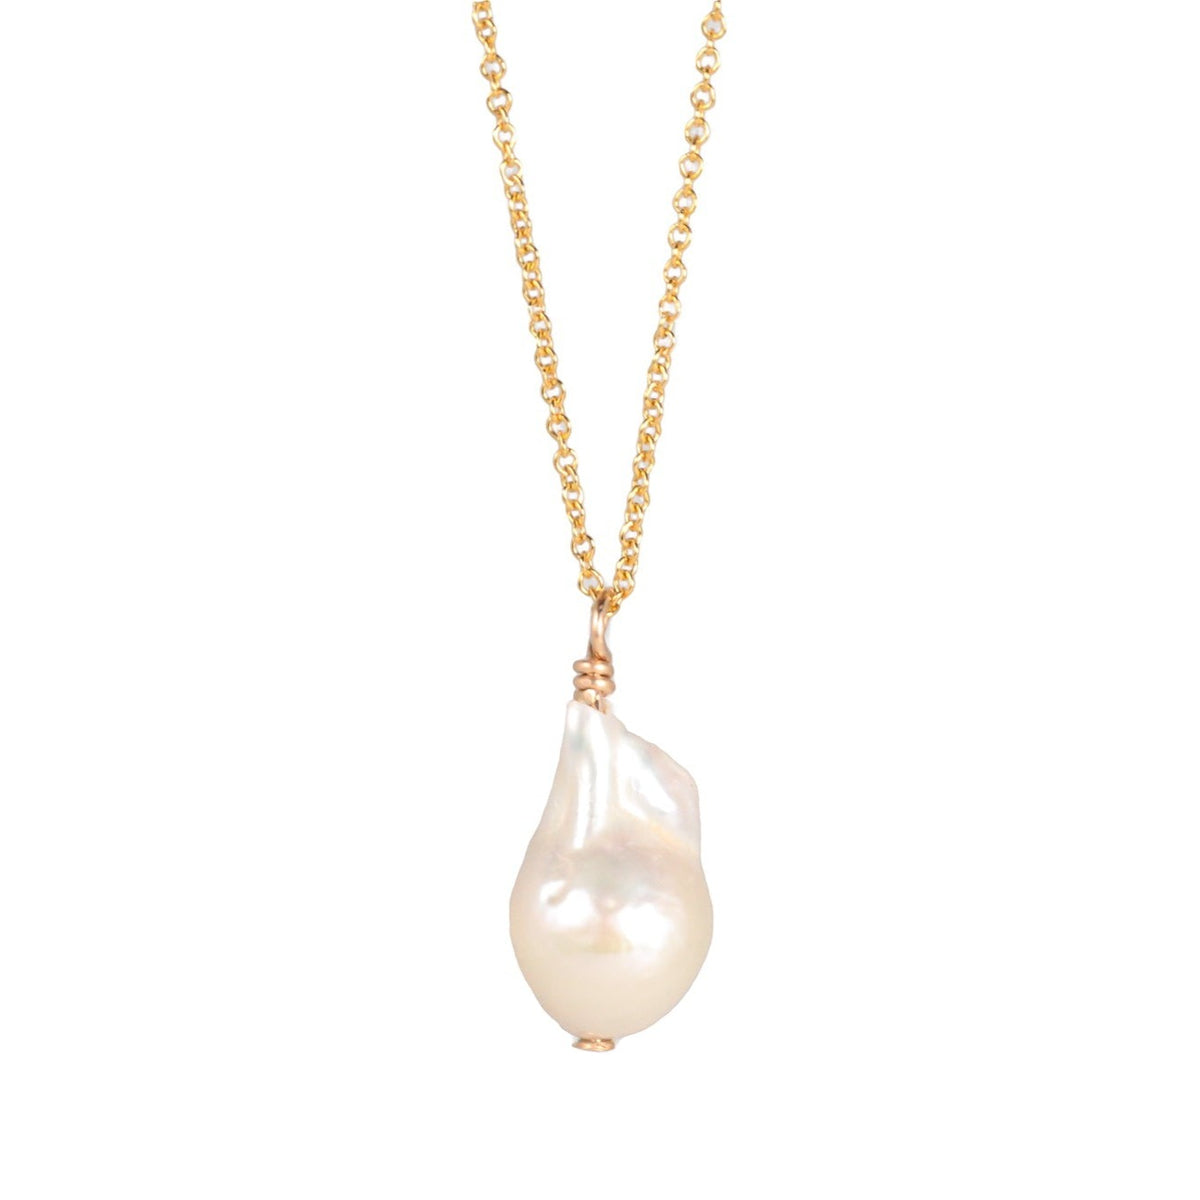 Baroque Pearl Necklace - 14K gold filled